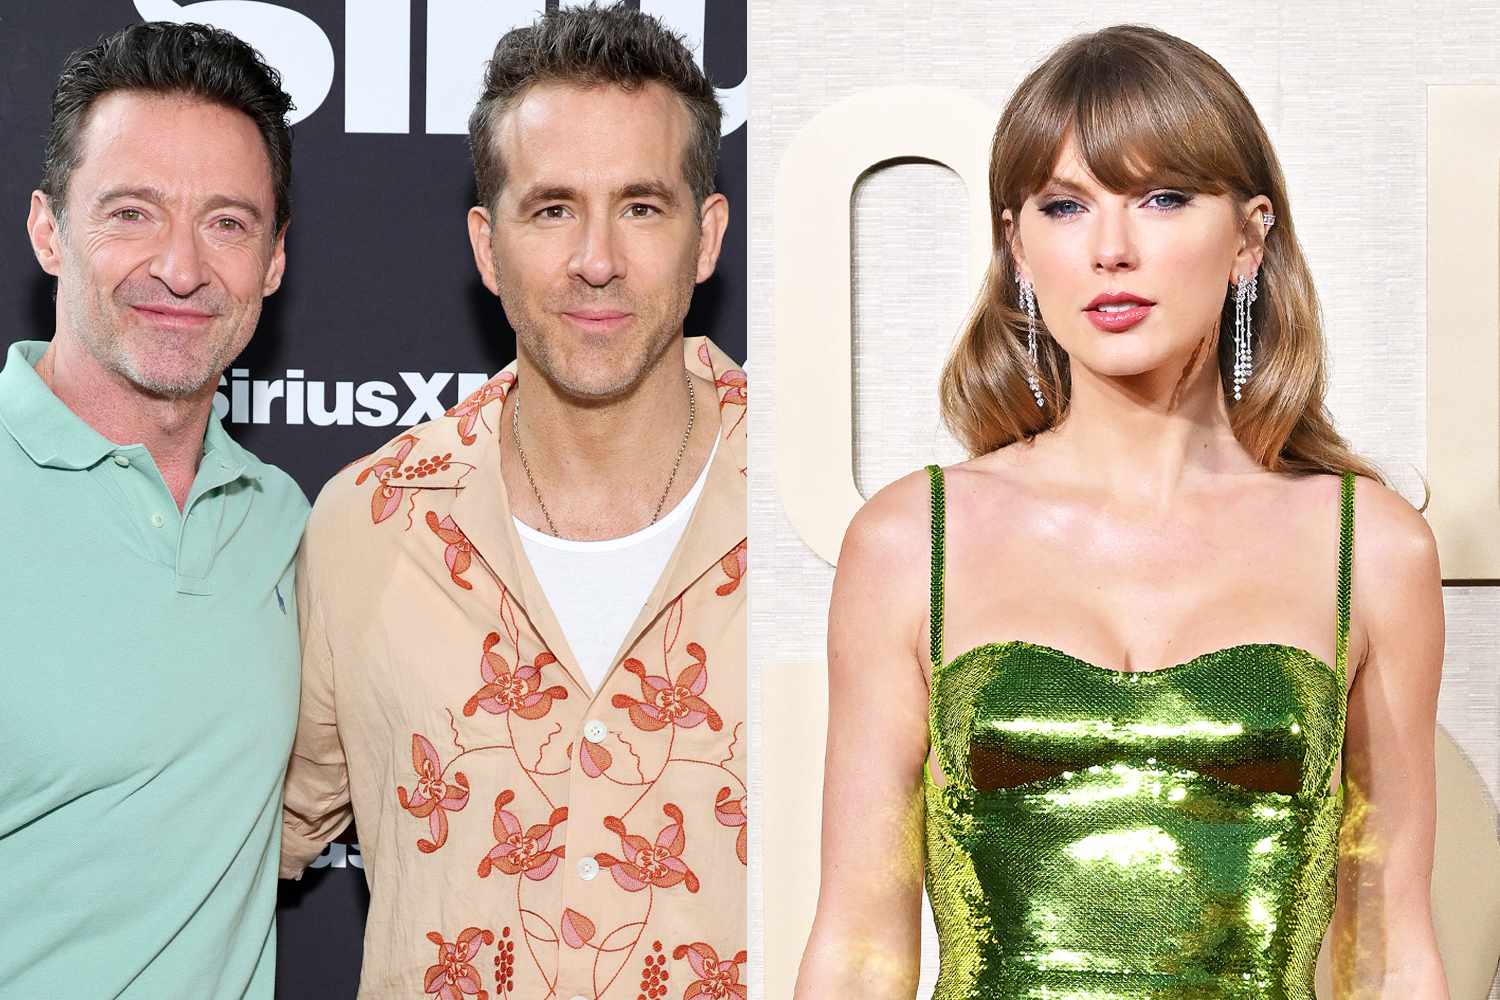 Ryan Reynolds and Hugh Jackman Reveal What It's Really Like to 'Have a Beer' with 'Fun' Taylor Swift (Exclusive)